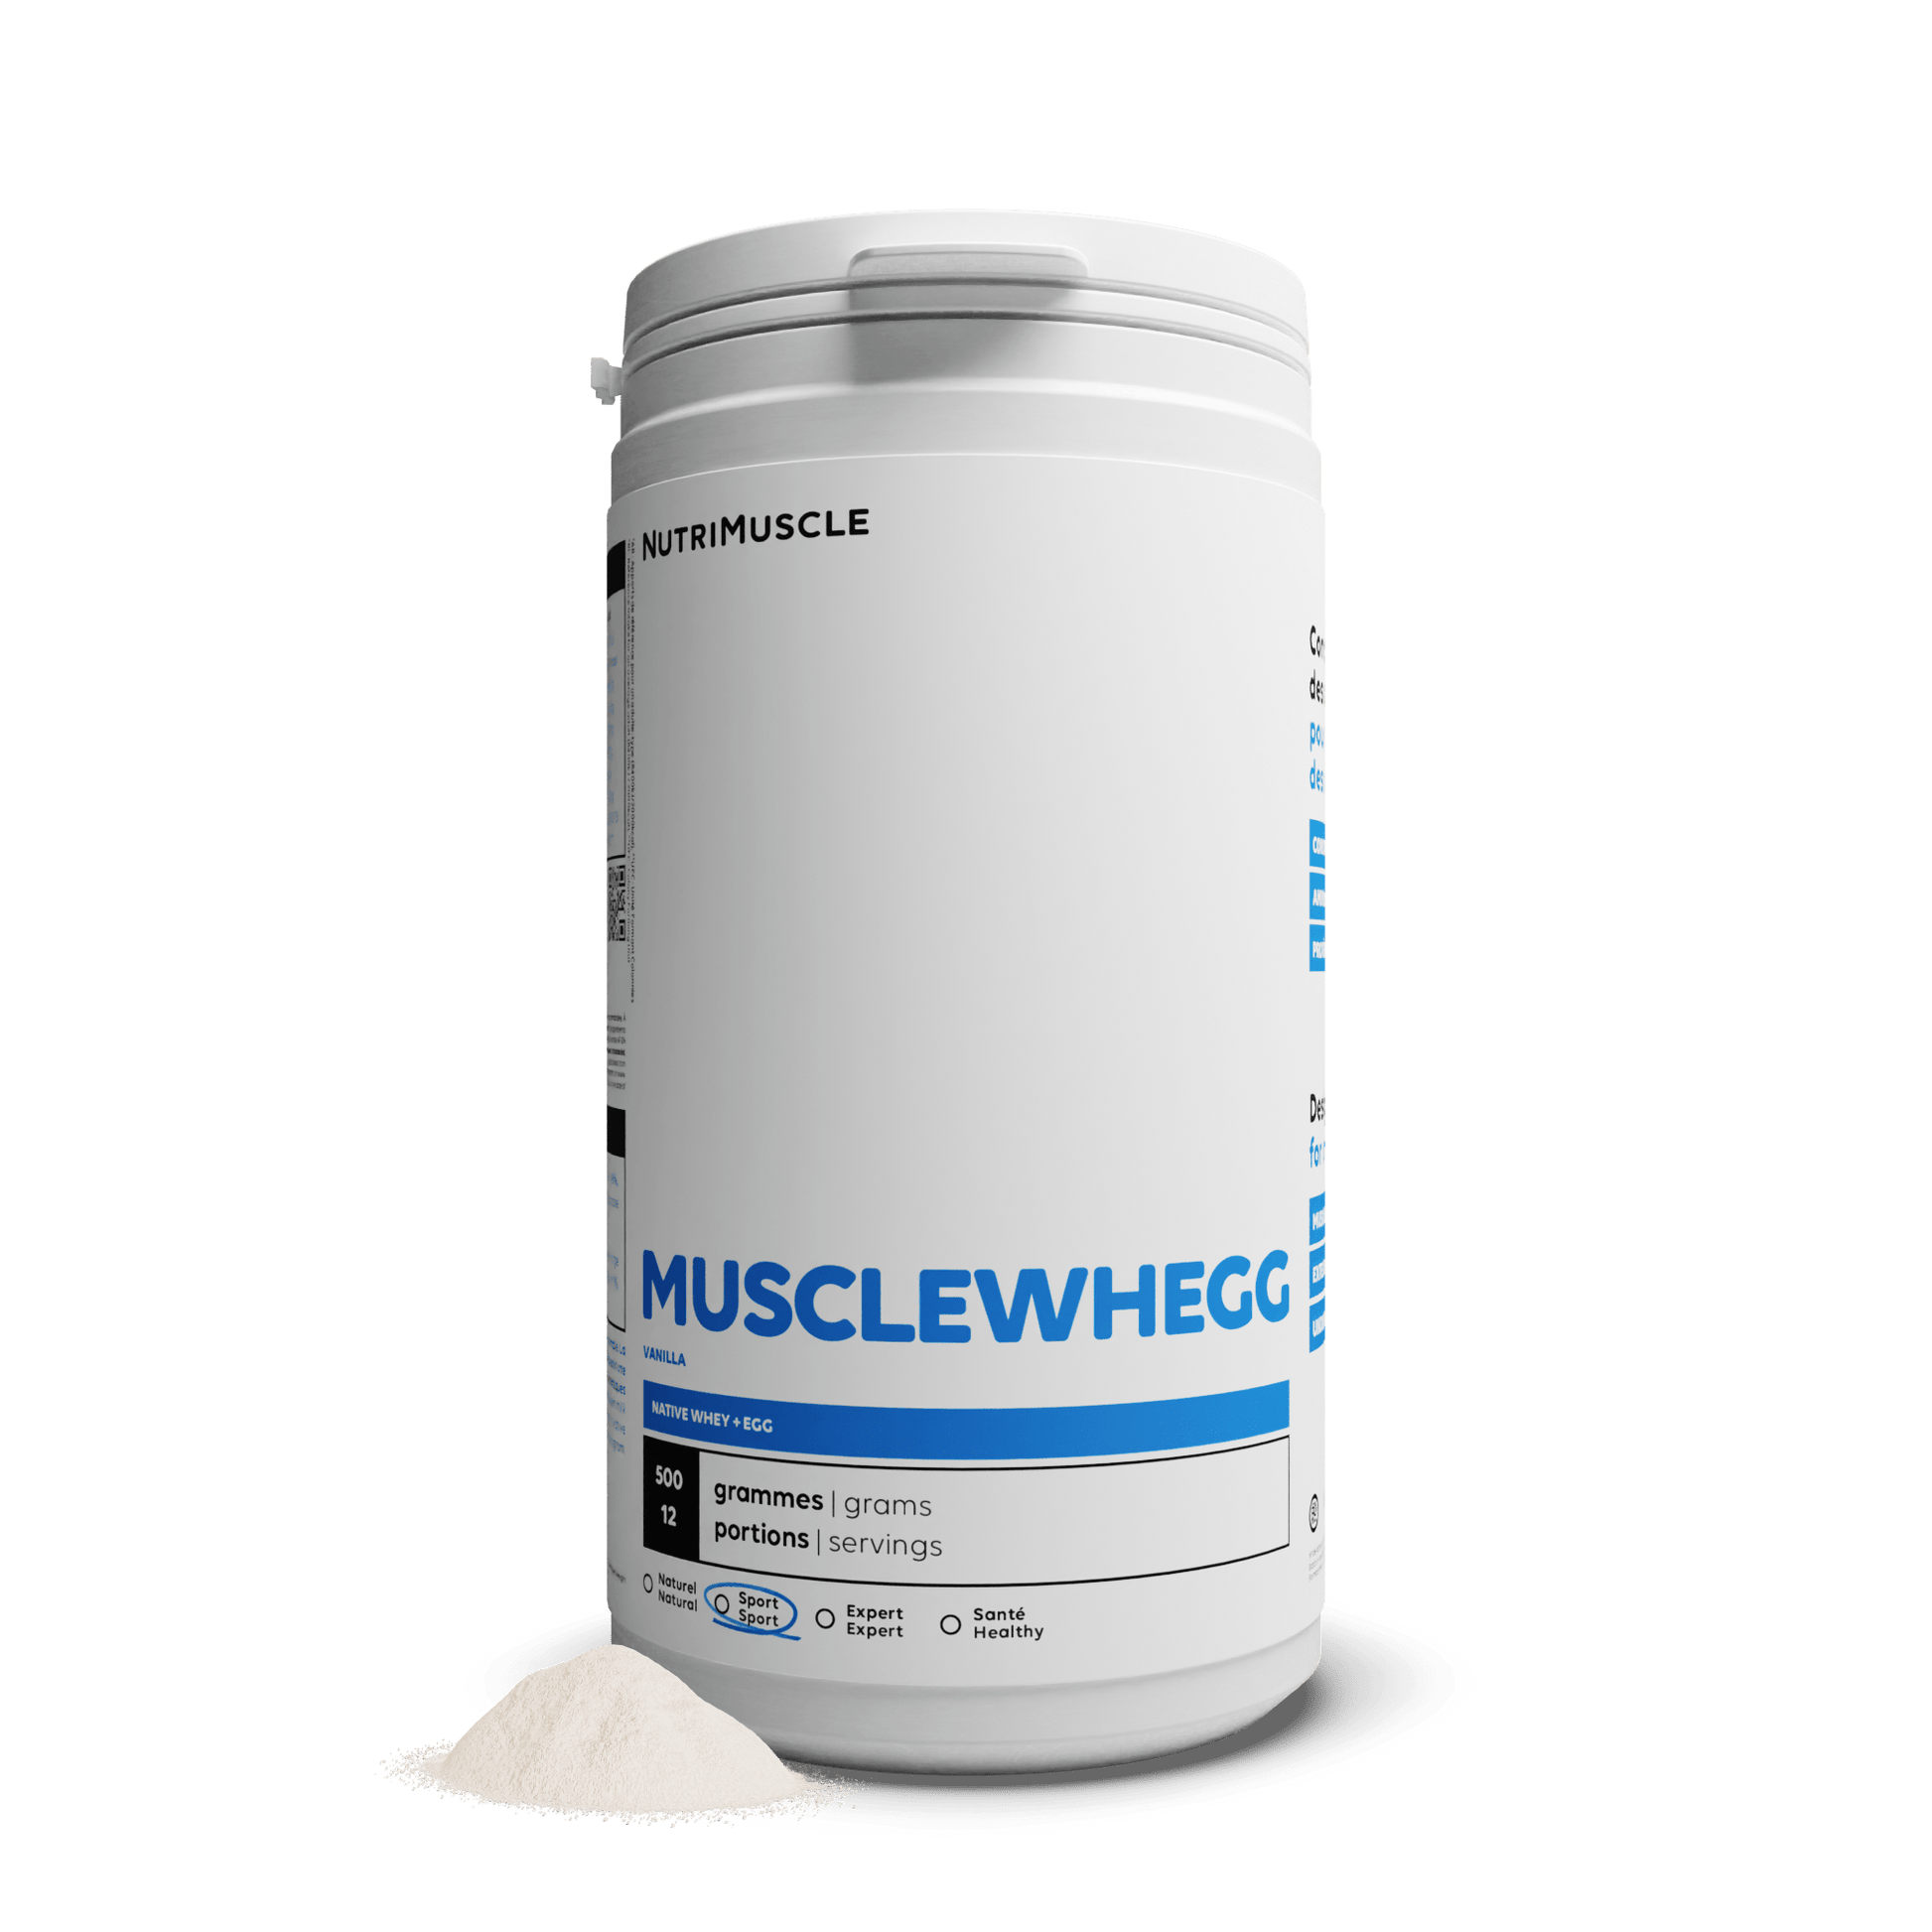 Nutrimuscle Protéines Vanille / 500 g Musclewhegg - Mix Protein